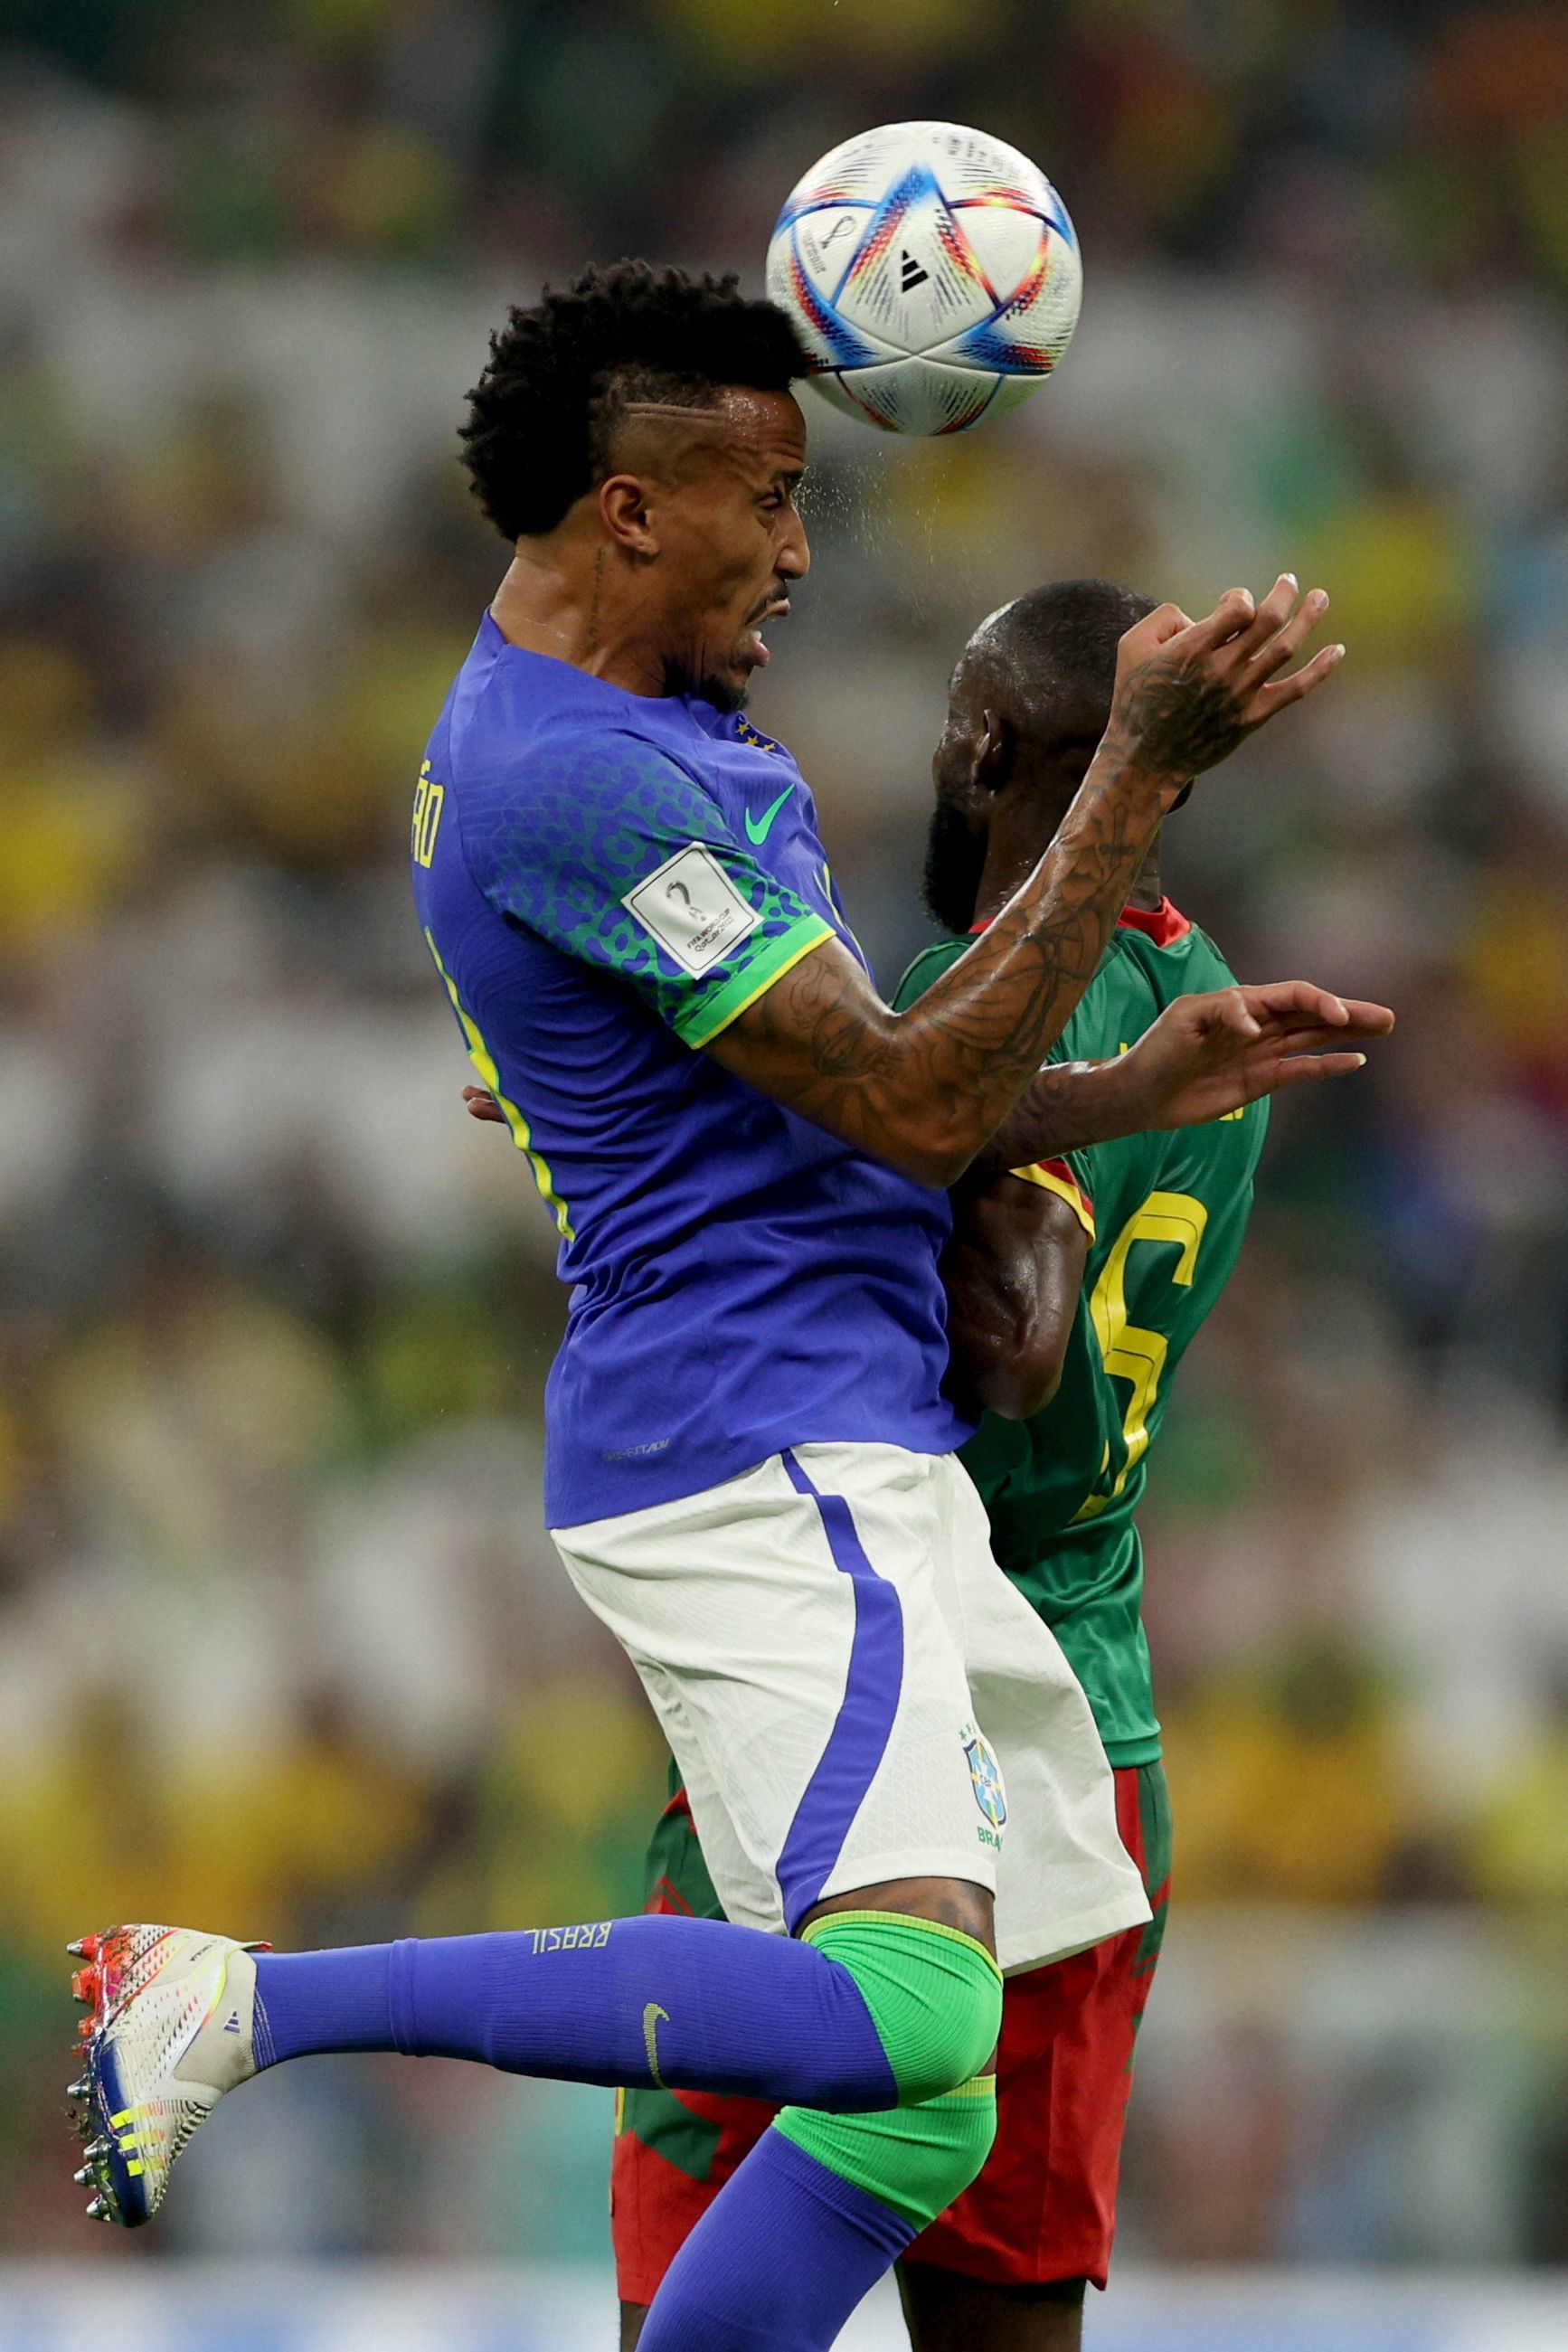 lt;HIT gt;Brazil lt;/HIT gt;'s defender #14 Eder Militao (L) heads the ball as he fights for it with Cameroon's forward #06 Nicolas Moumi Ngamaleu during the Qatar 2022 World Cup Group G football match between Cameroon and  lt;HIT gt;Brazil lt;/HIT gt; at the Lusail Stadium in Lusail, north of Doha on December 2, 2022. (Photo by Adrian DENNIS / AFP)